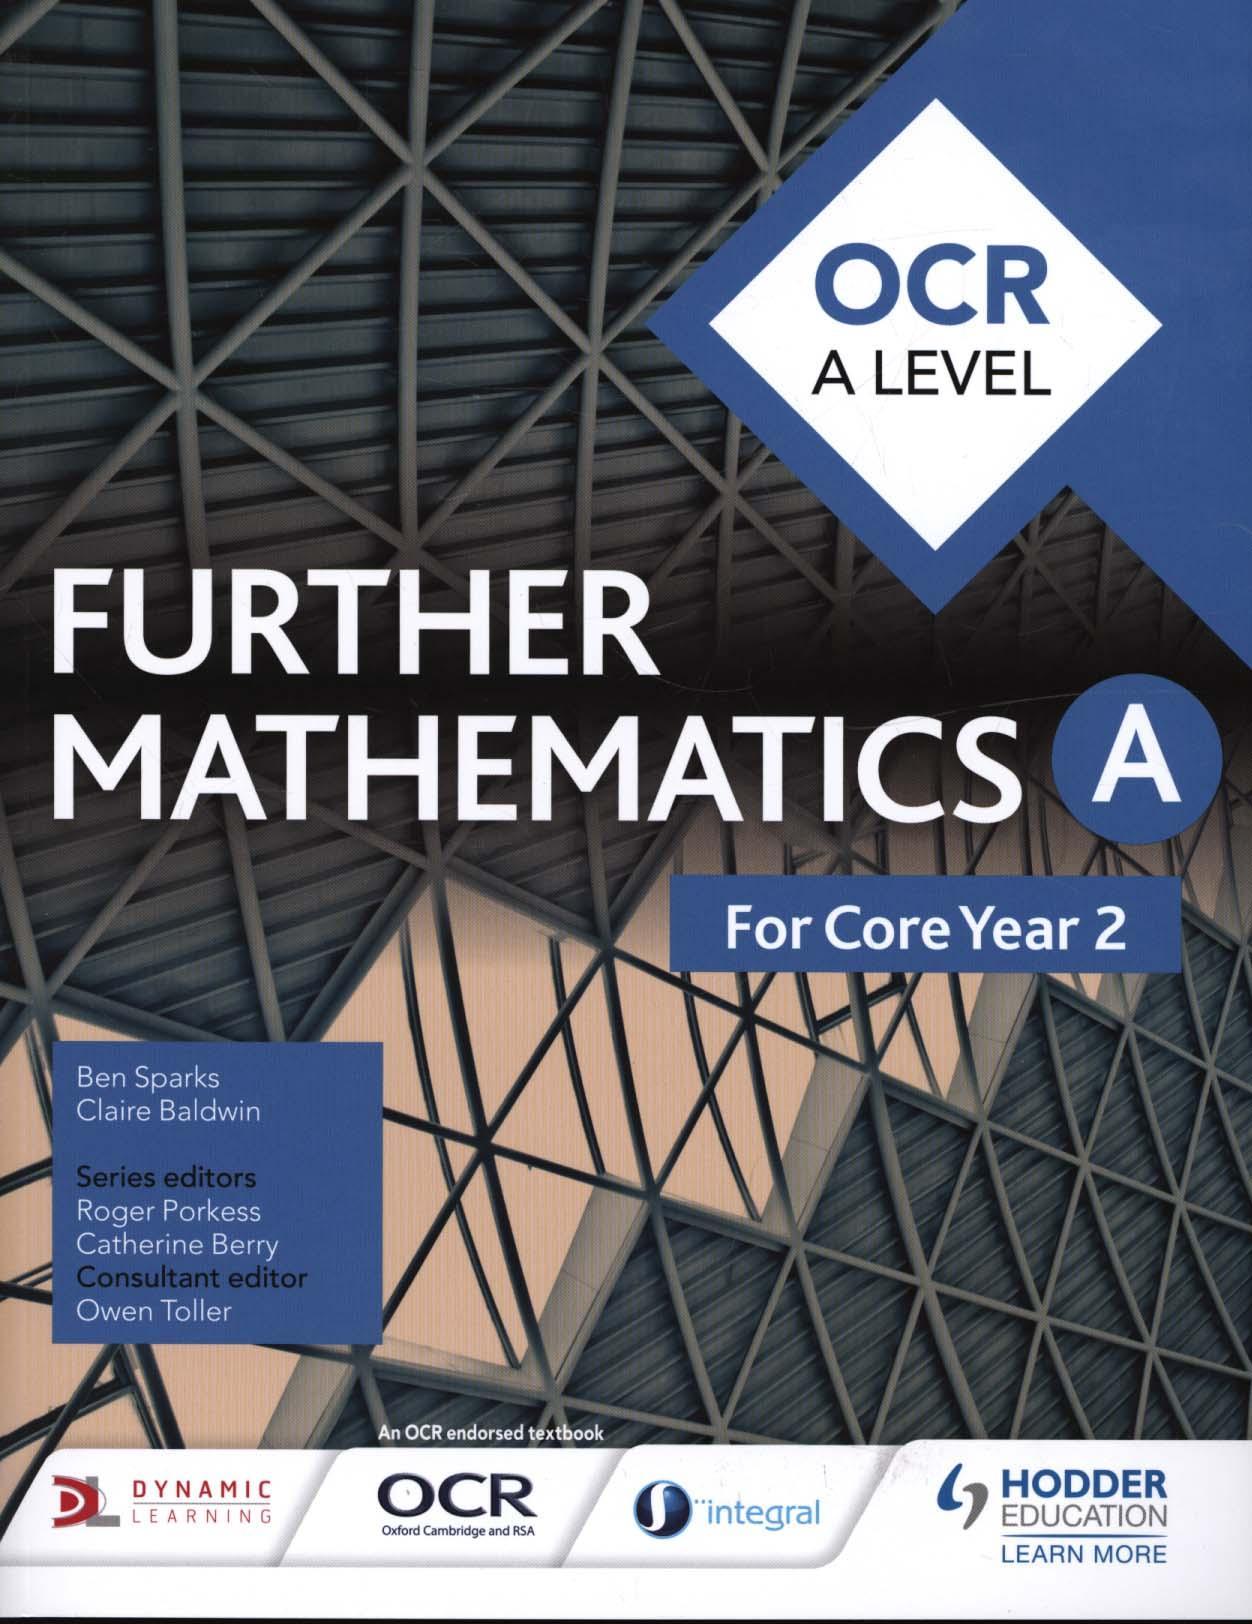 OCR A Level Further Mathematics Core Year 2